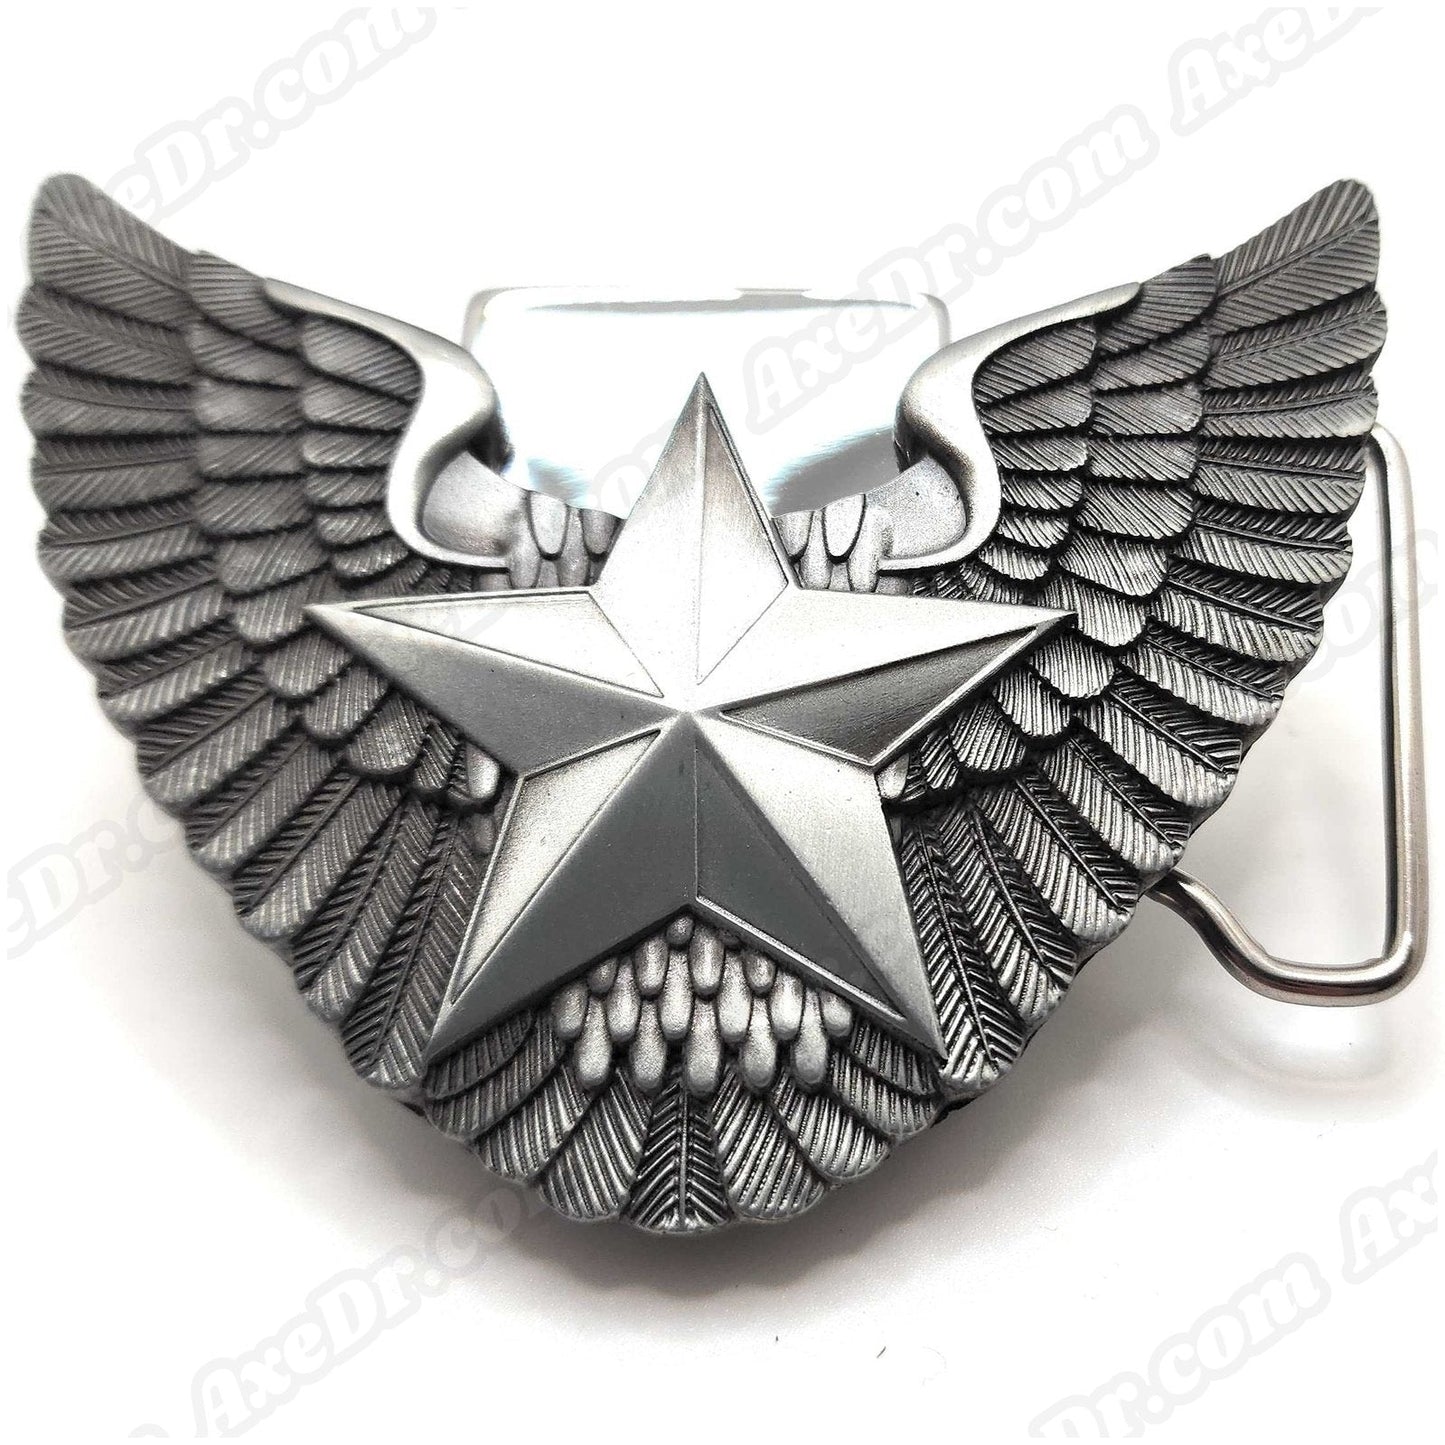 Nautical Star Wings Lighter Belt Buckle and Genuine Leather Belt shop.AxeDr.com 